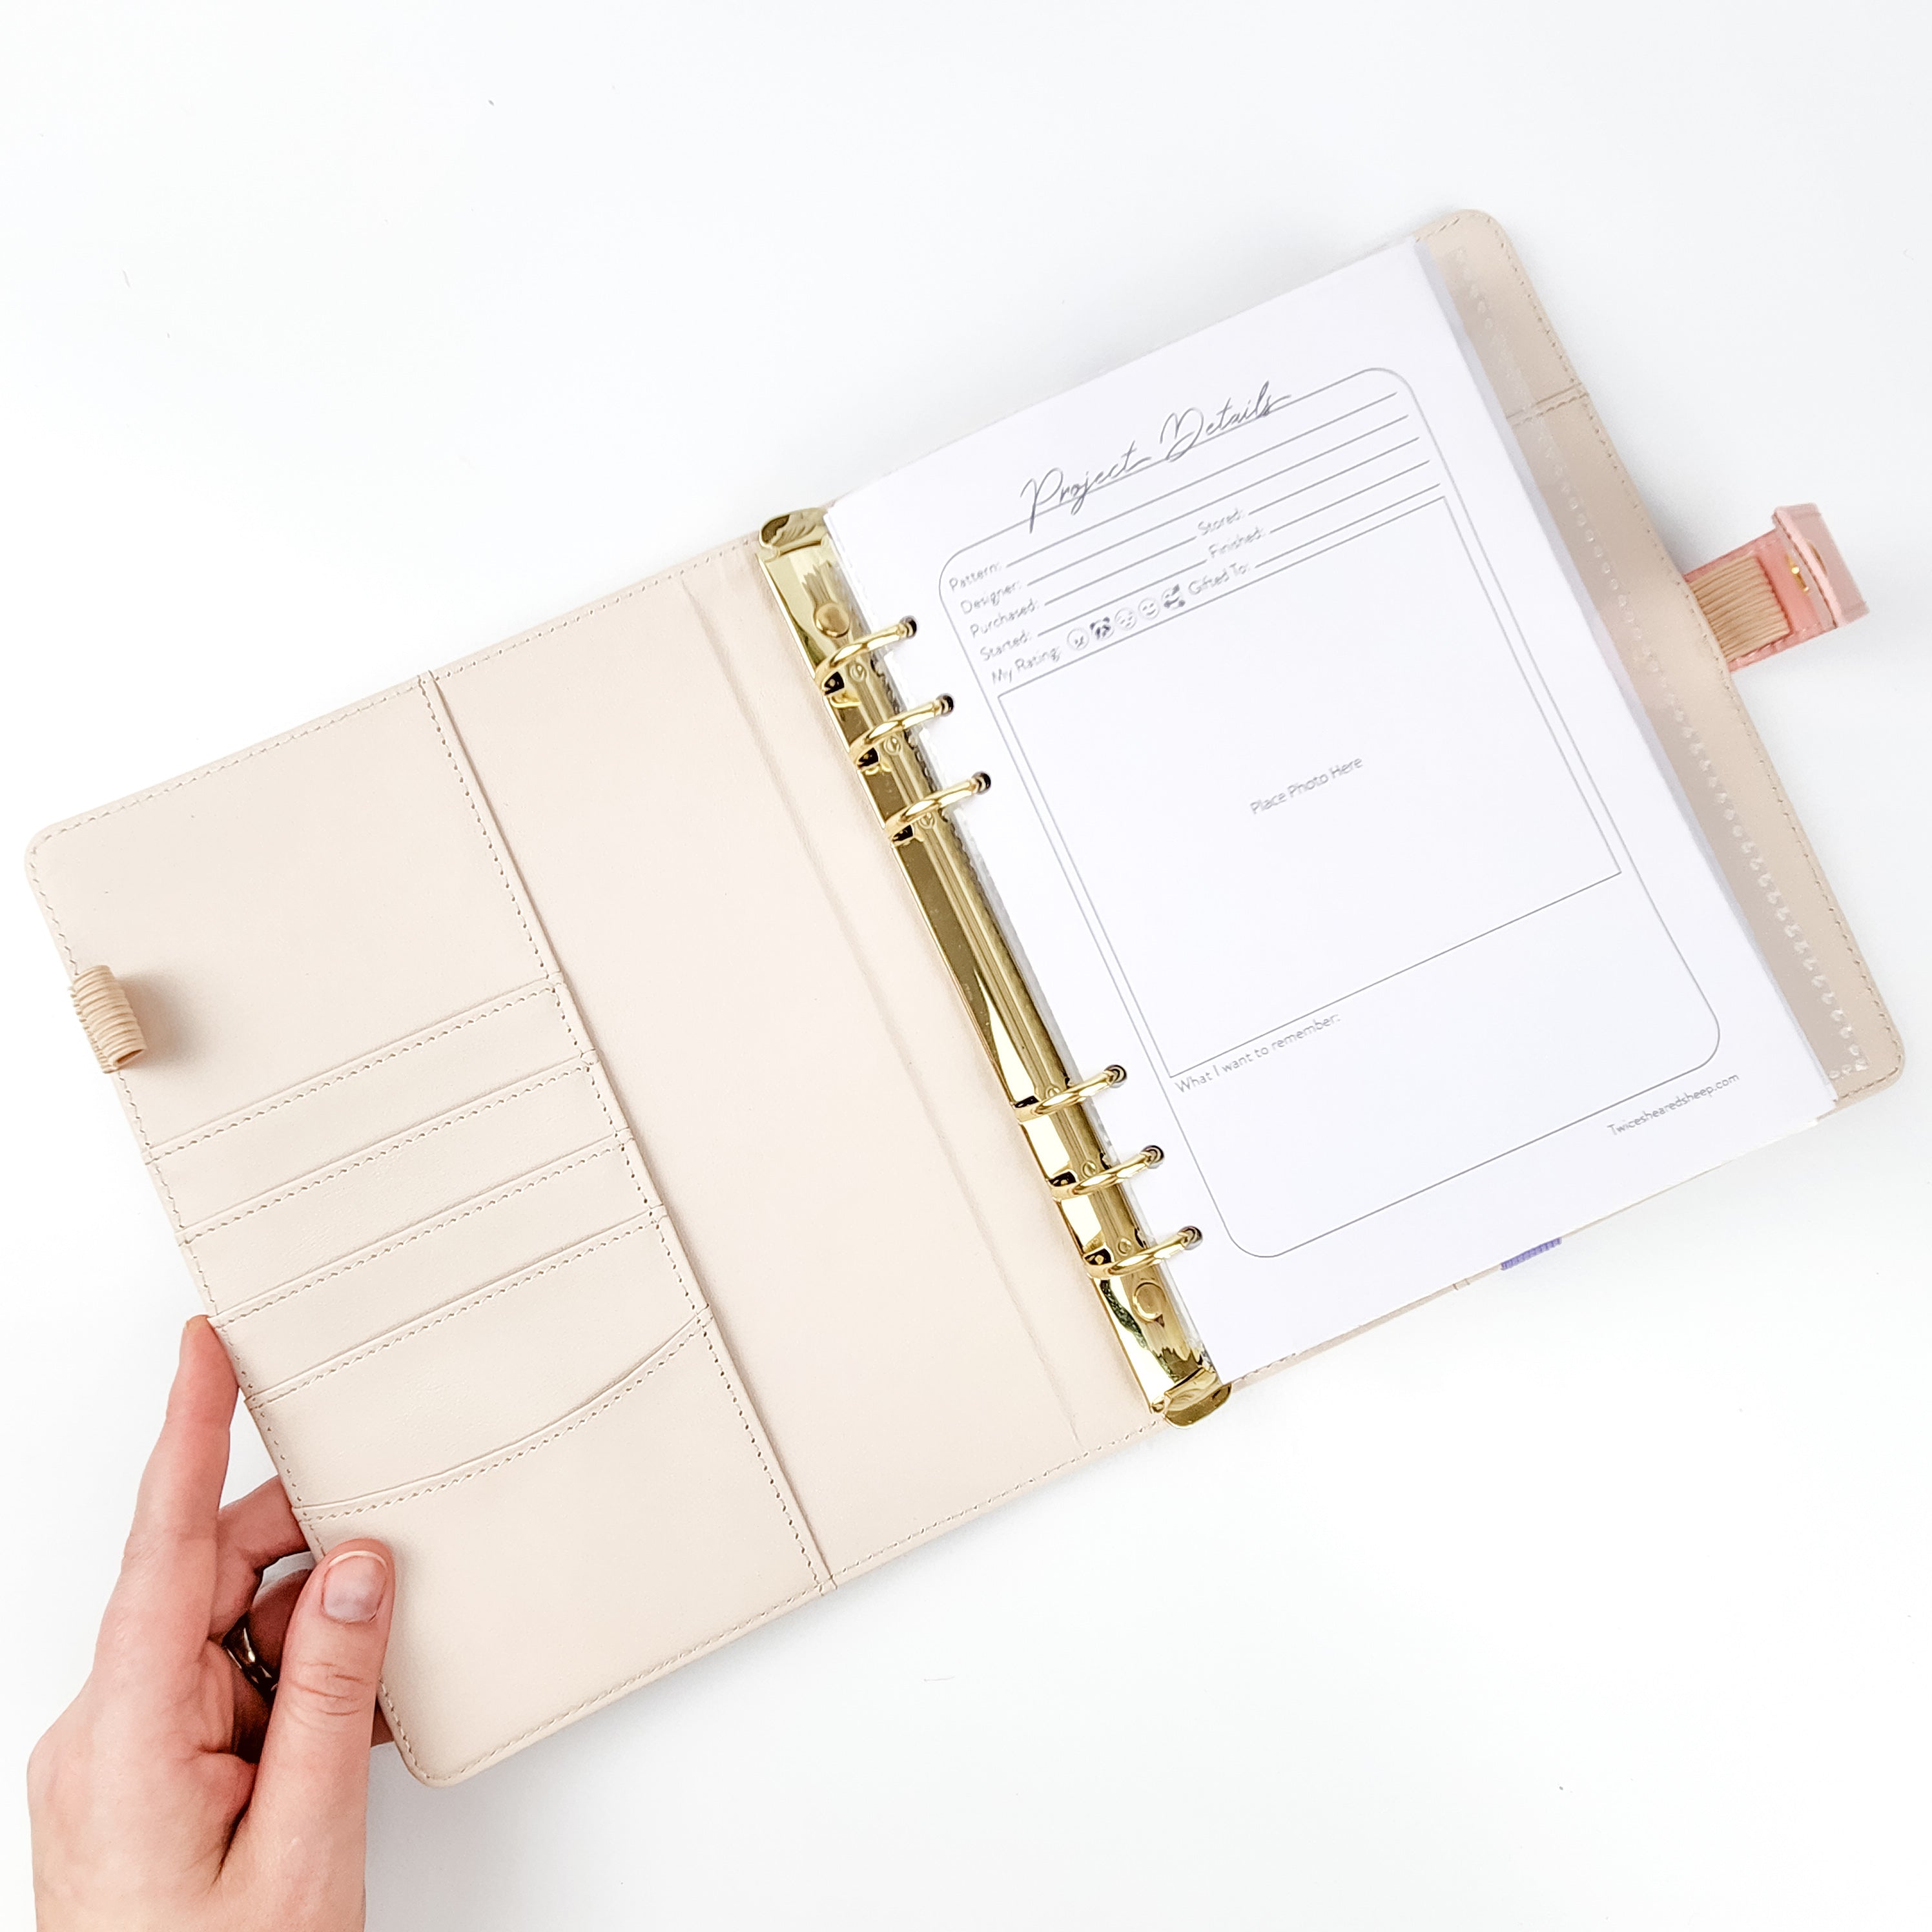 Project Journal Planner for Knitters & Crocheters